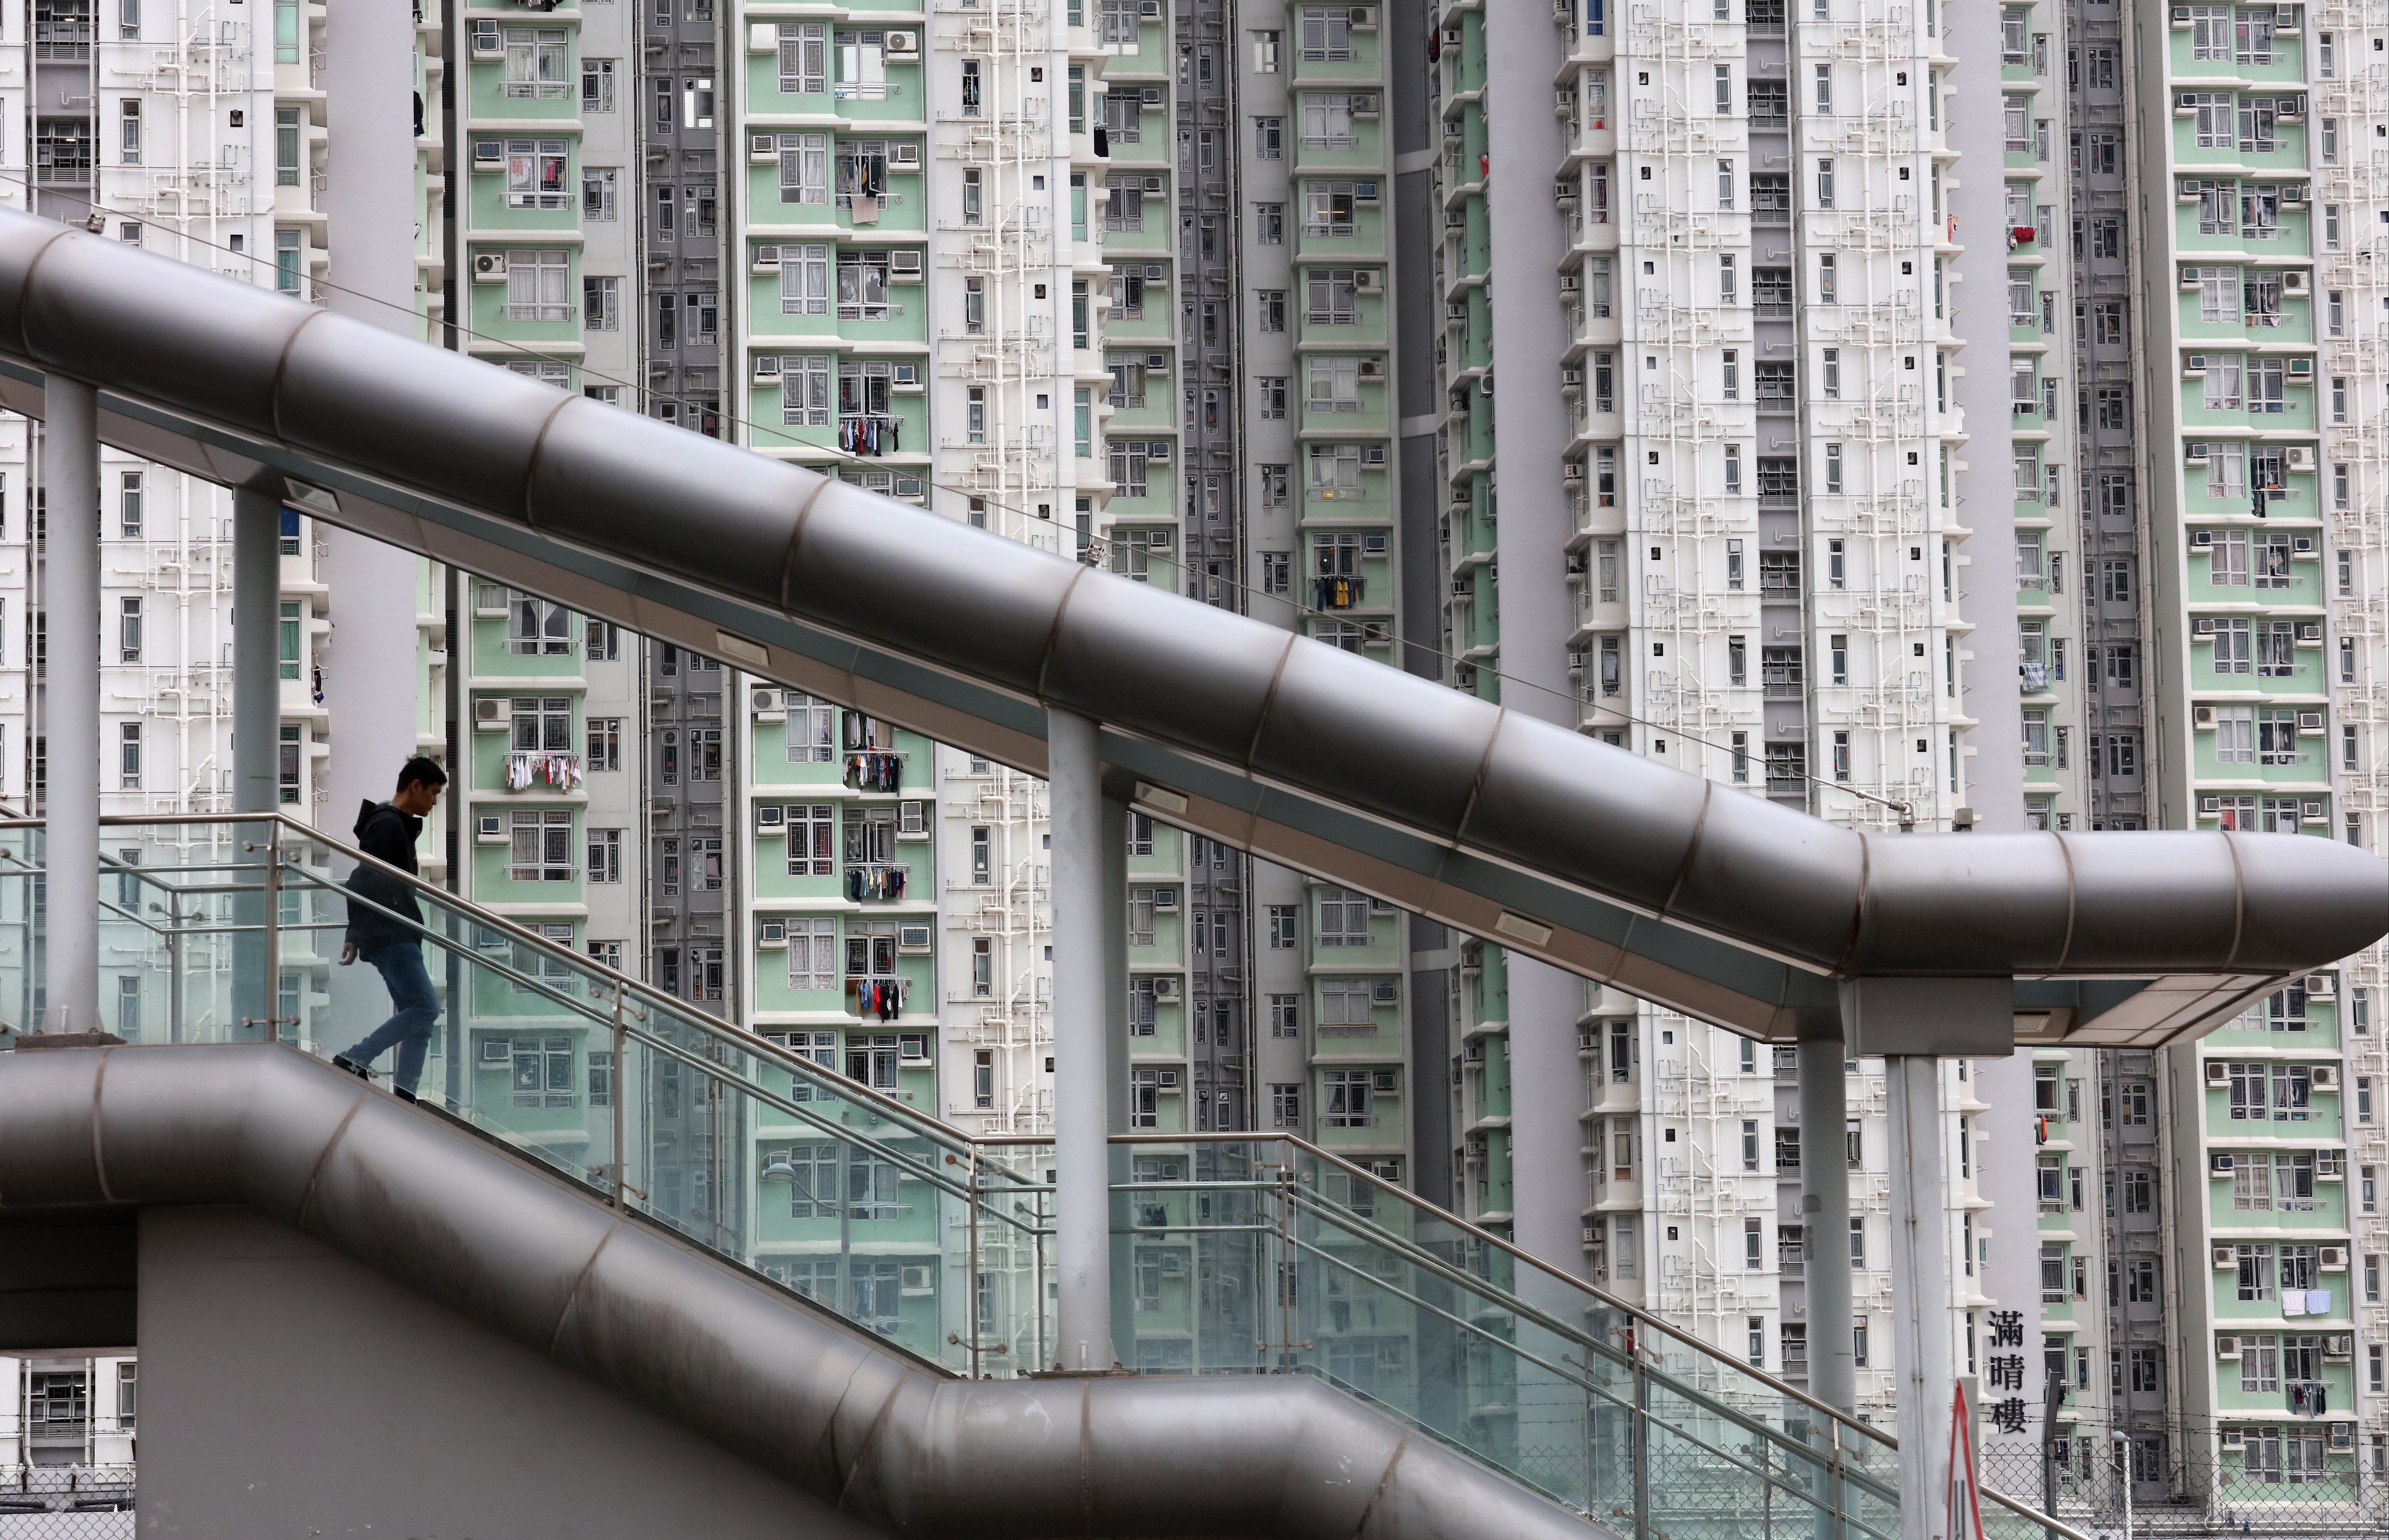 The high down payment and high land values have made it extremely difficult for those with modest means to own a home in prosperous Hong Kong. Photo: Felix Wong